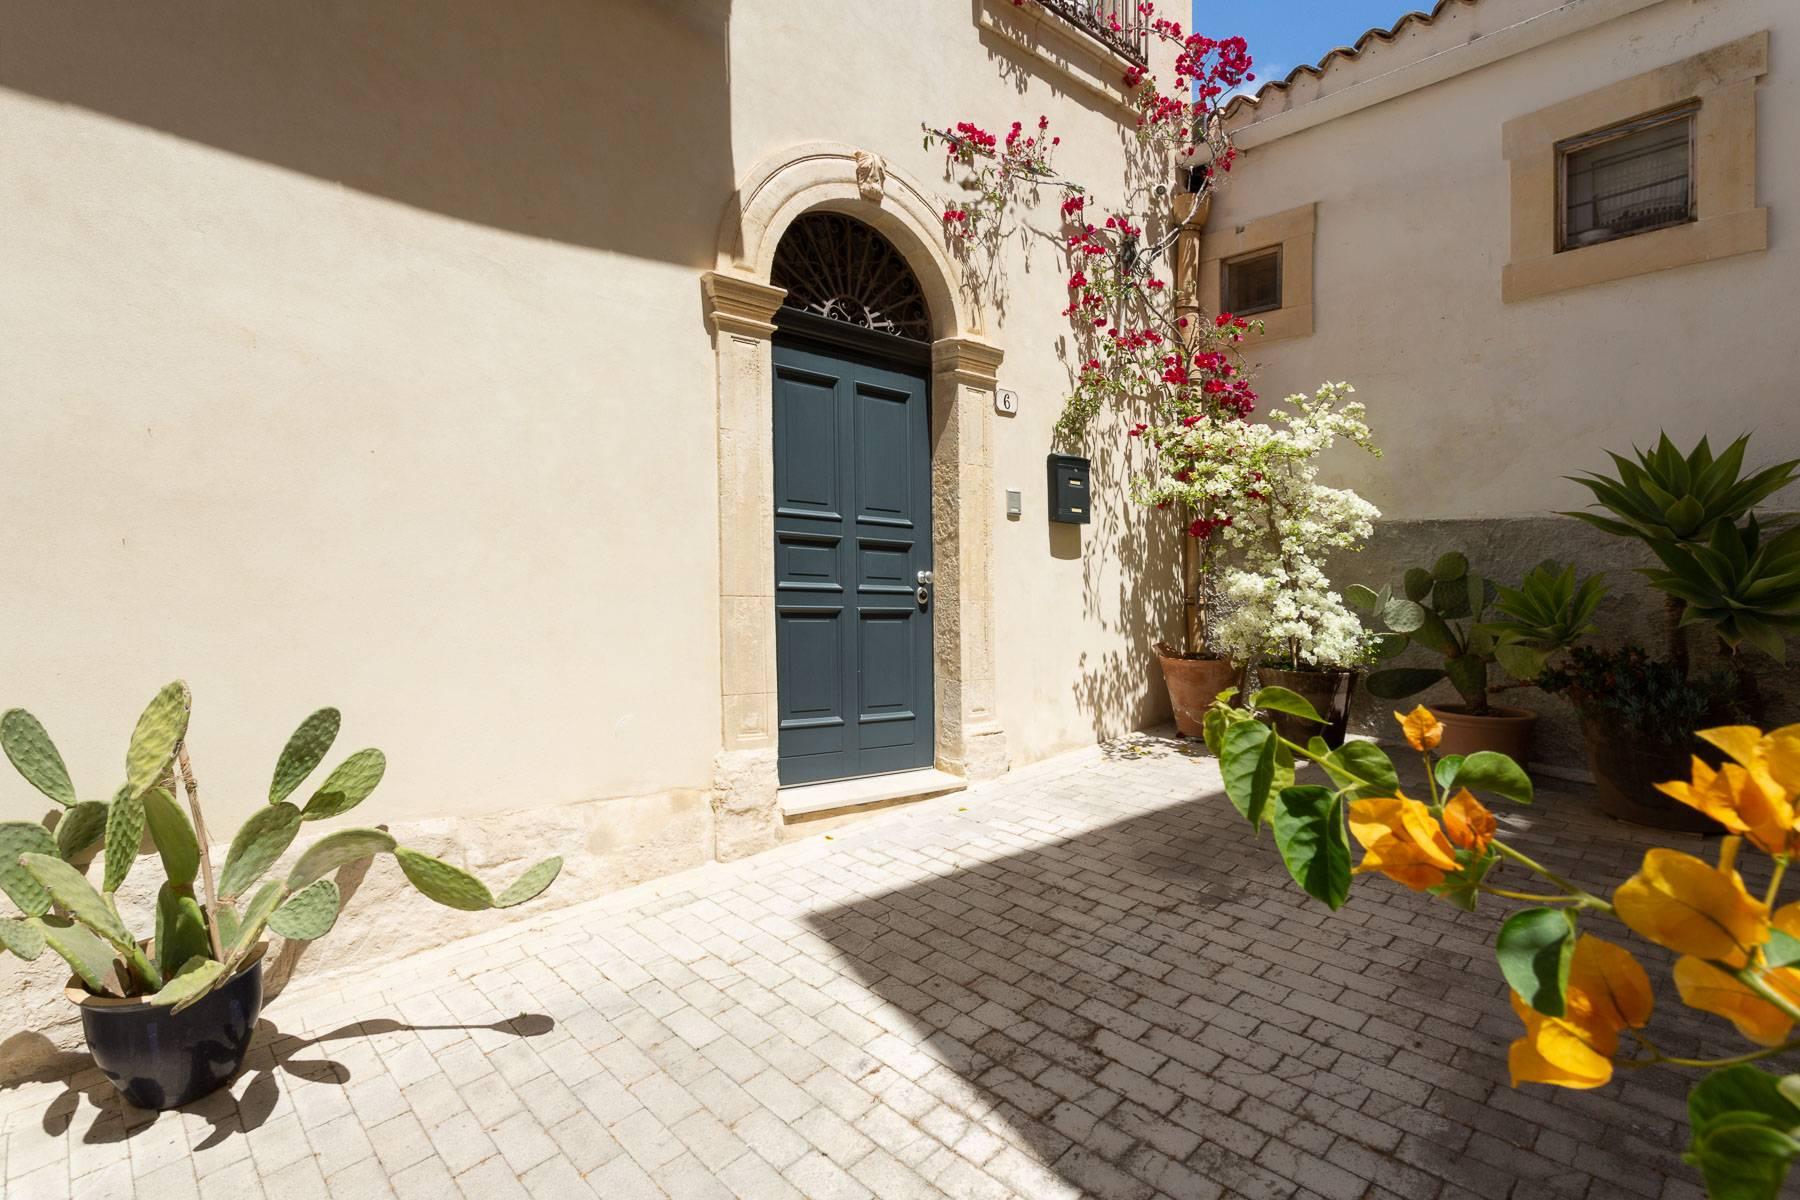 Turnkey townhouse in Noto. - 3